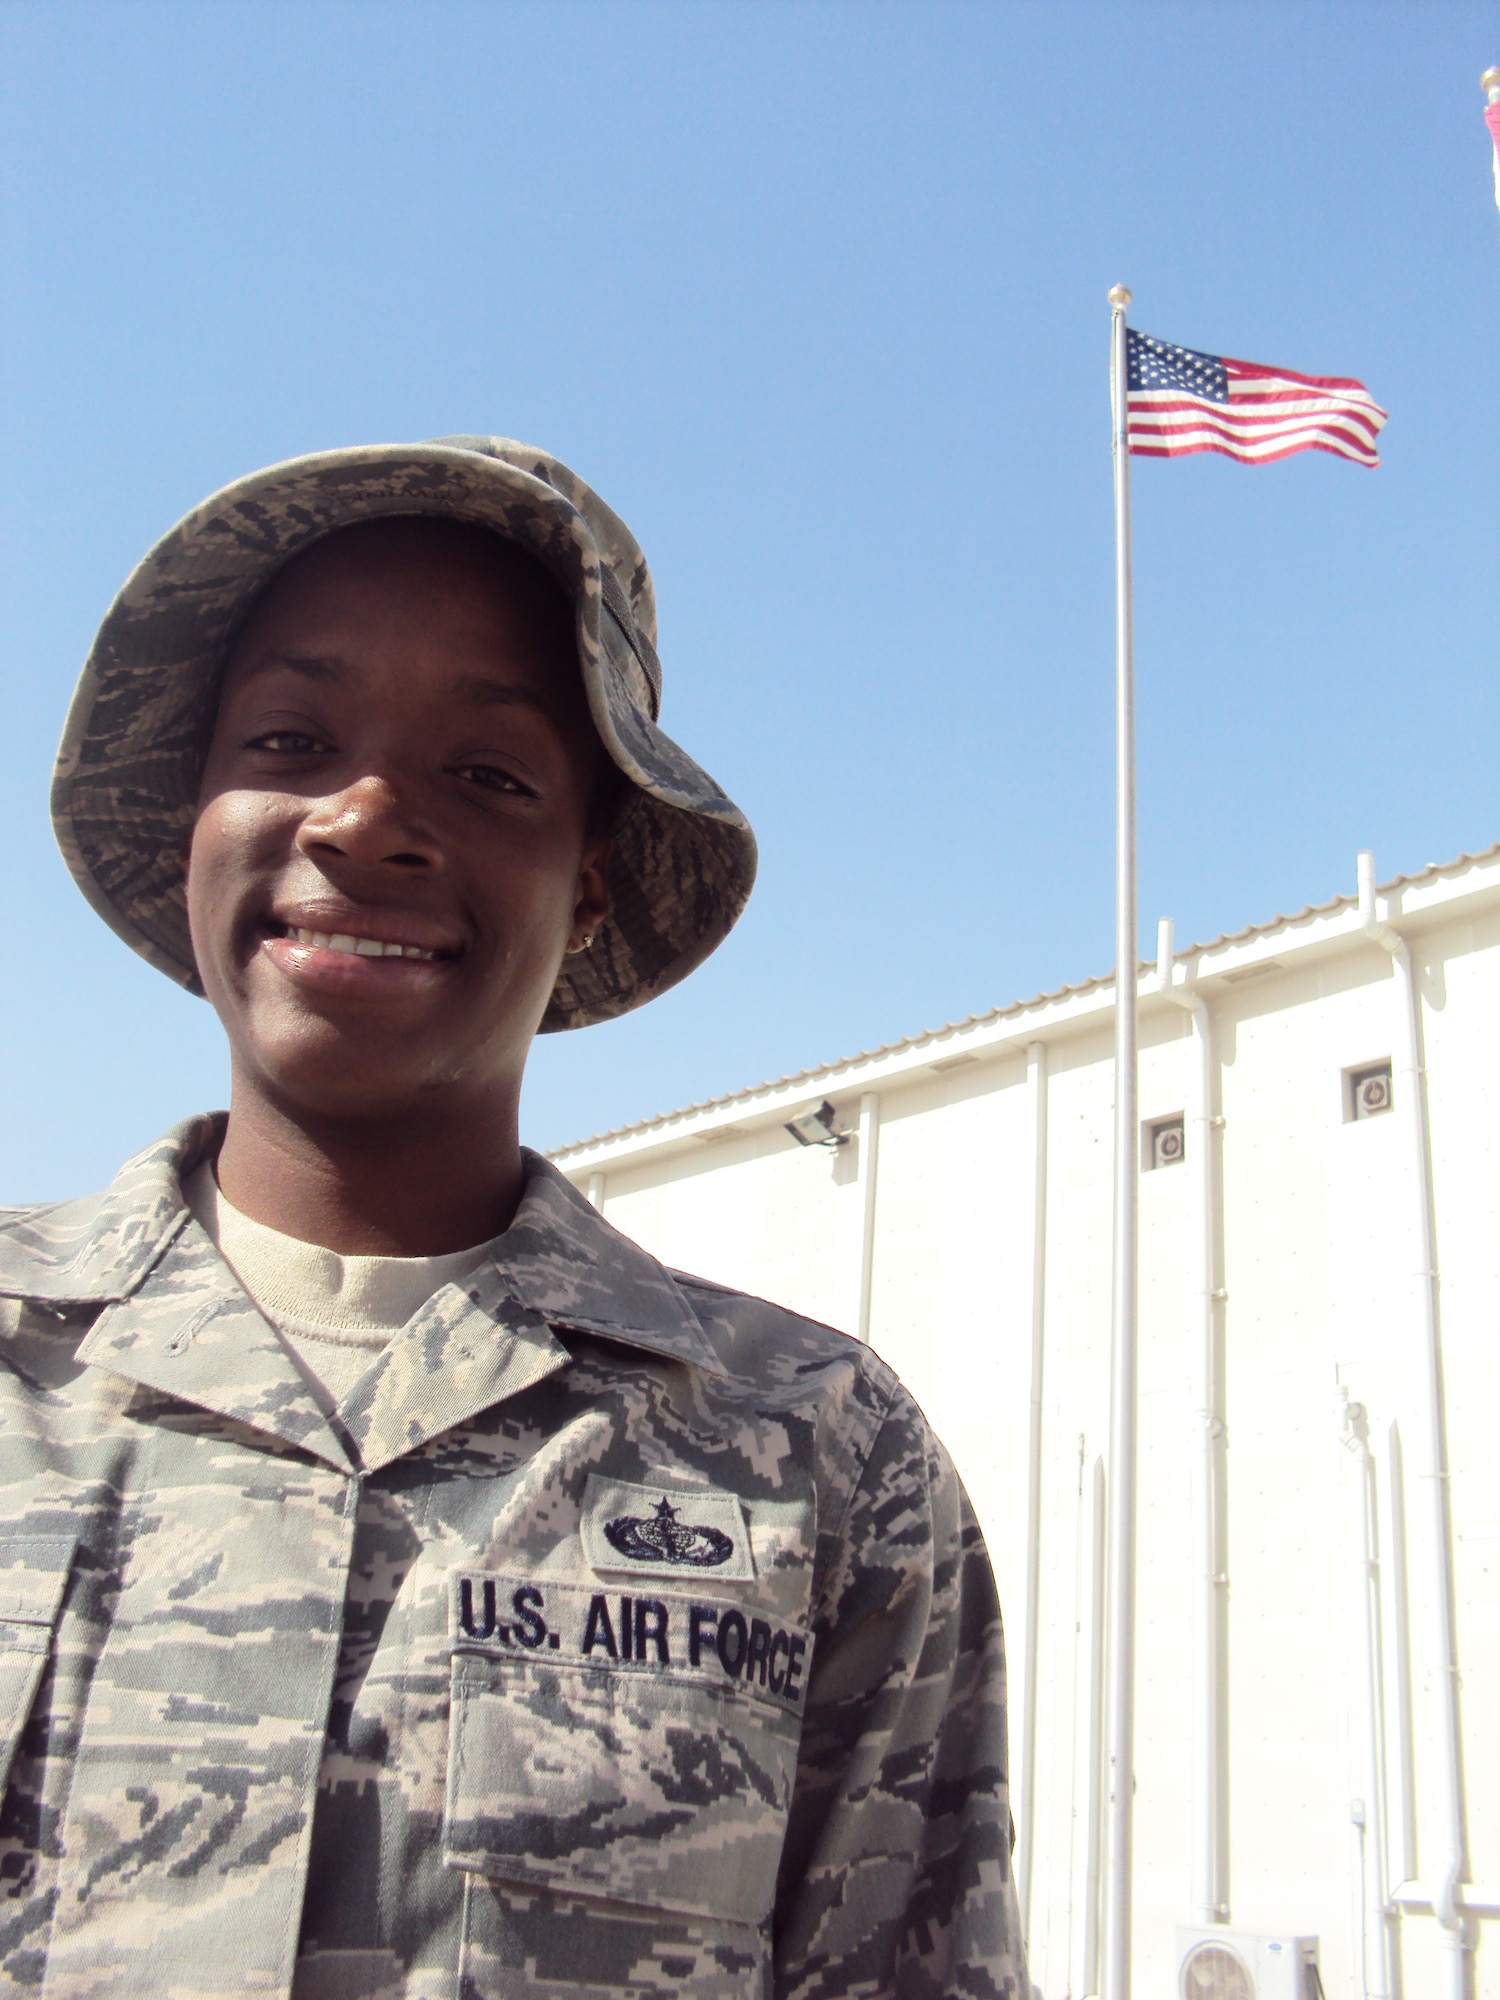 Staff Sgt. Sparkle Reid, a services journeyman, is deployed as the non-appropriated funds custodian for the 380th Expeditionary Force Support Squadron at a non-disclosed base in Southwest Asia.  Here she is pictured by the American flag by the 380th Air Expeditionary Wing headquarters on Feb. 25, 2010. Sergeant Reed lost her uncle, Louie A. Williams, when the World Trade Center towers came down on Sept. 11, 2001. He worked on the 66th floor of the North Tower for the New York Port Authority as a paralegal. On Feb. 27, 2009, Sergeant Reid lost her father, Charles T. Reid, after complications from surgery. She credits both her uncle and her father as her inspiration for serving. Sergeant Reid is deployed from from the 48th Force Support Squadron at RAF Lakenheath, England, and her hometown is Queens, N.Y. (U.S. Air Force Photo/Master Sgt. Scott T. Sturkol/Released)